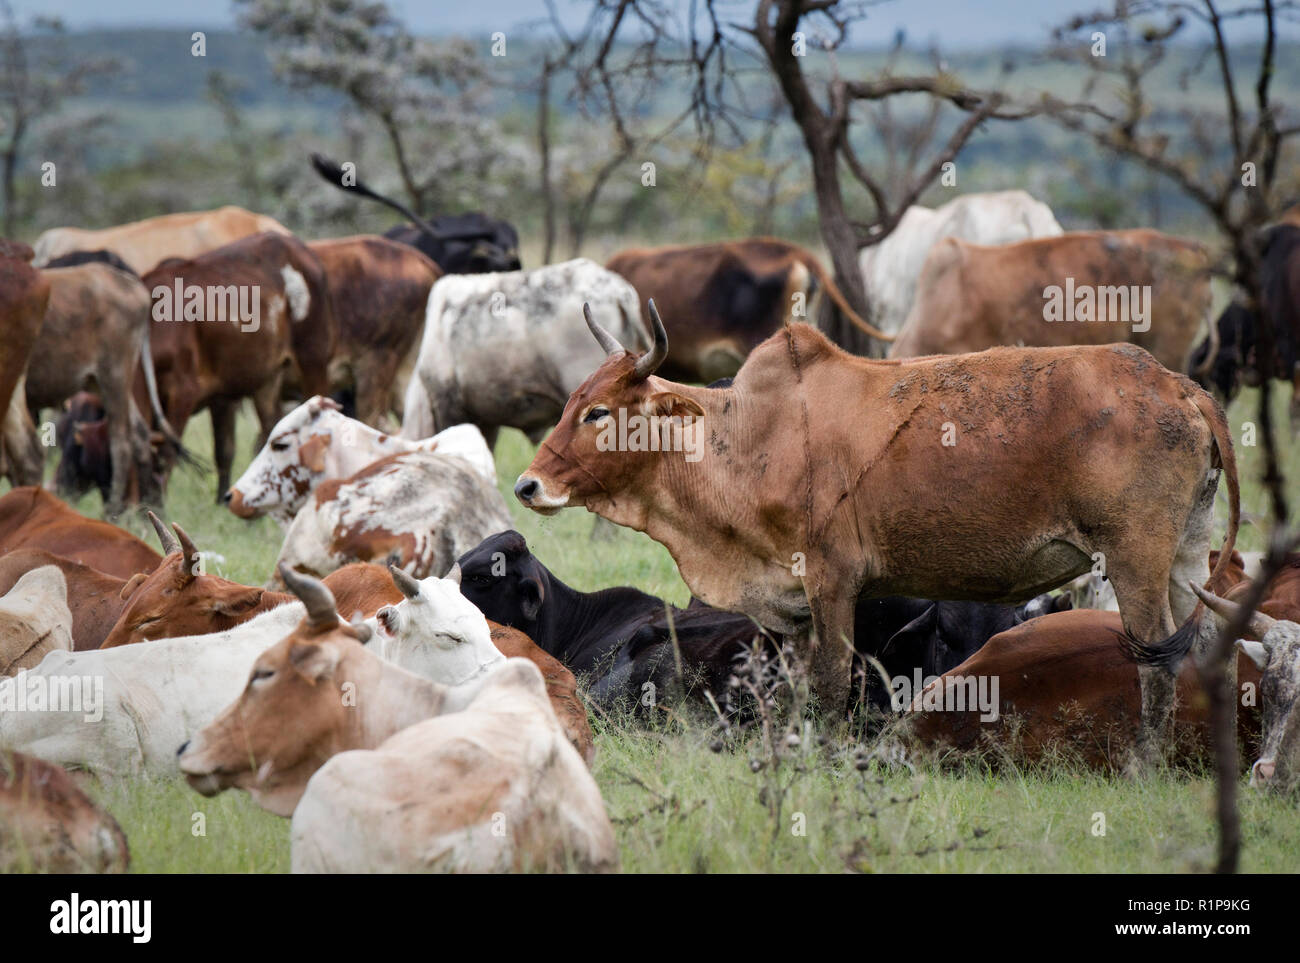 Cows are pictured at the Mara Naboisho Conservancy in southwestern Kenya, May 1, 2018. Stock Photo